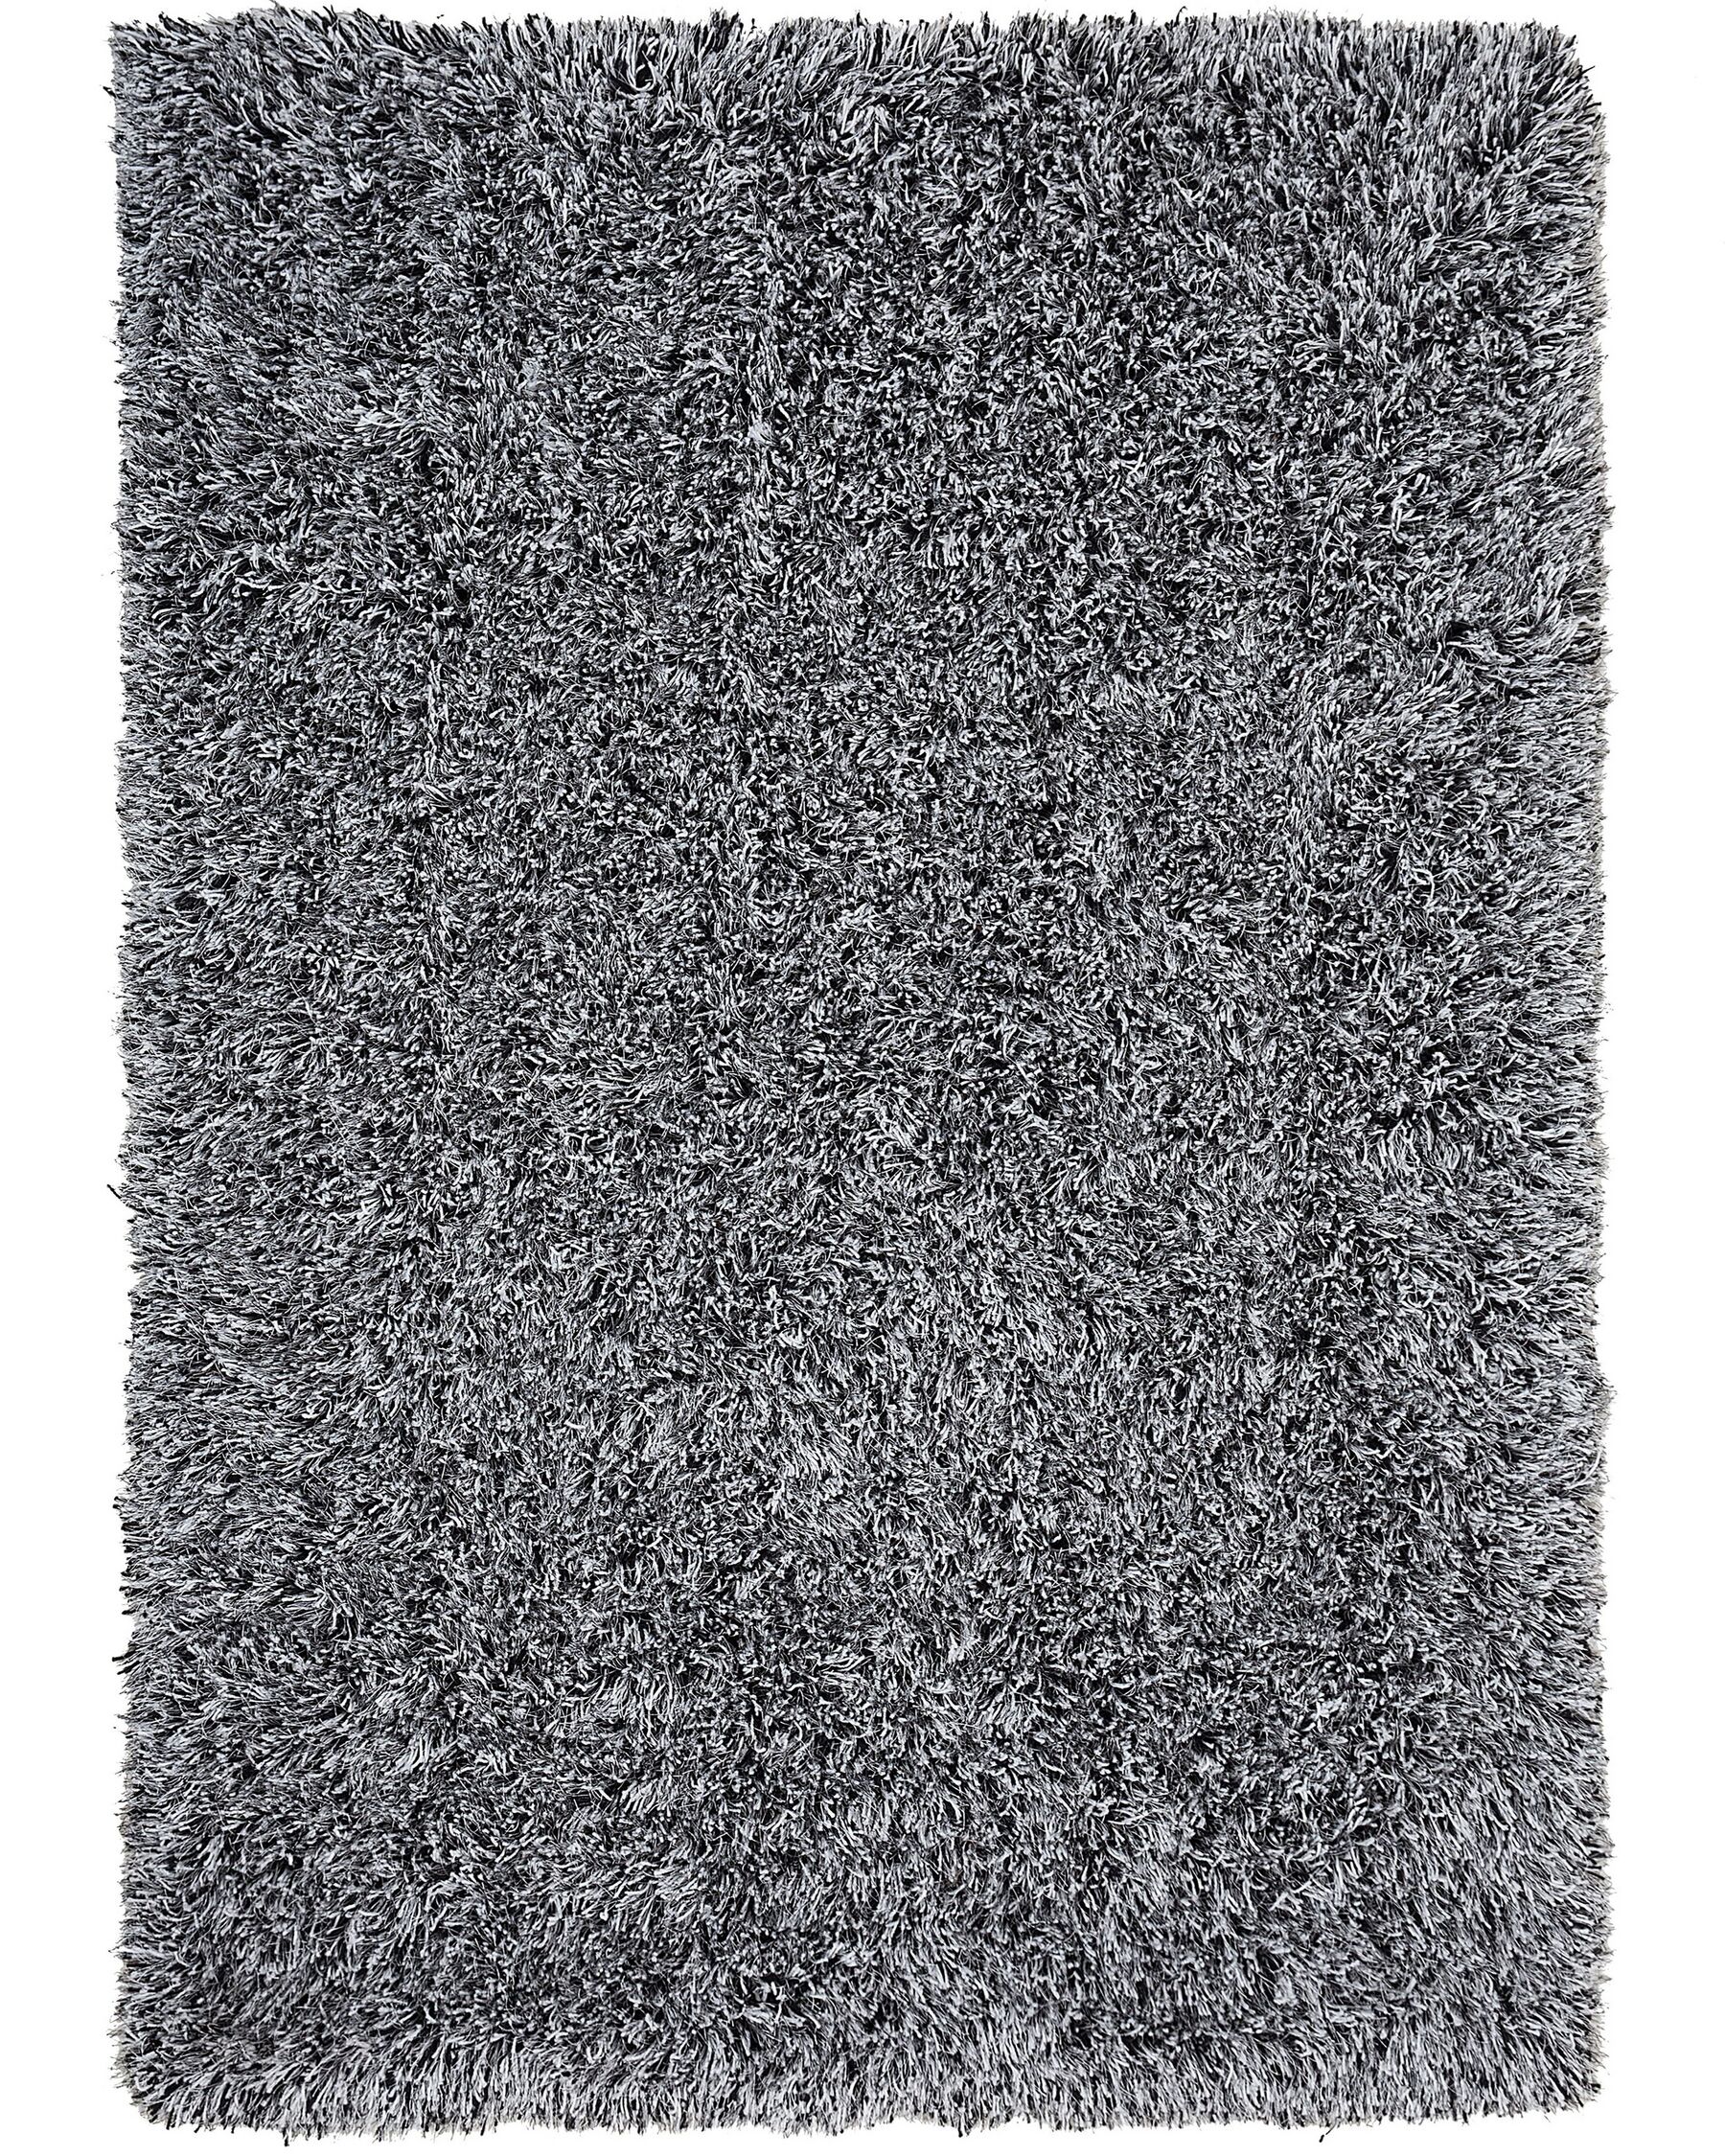 Shaggy Area Rug 200 x 300 cm Black and White CIDE_746817